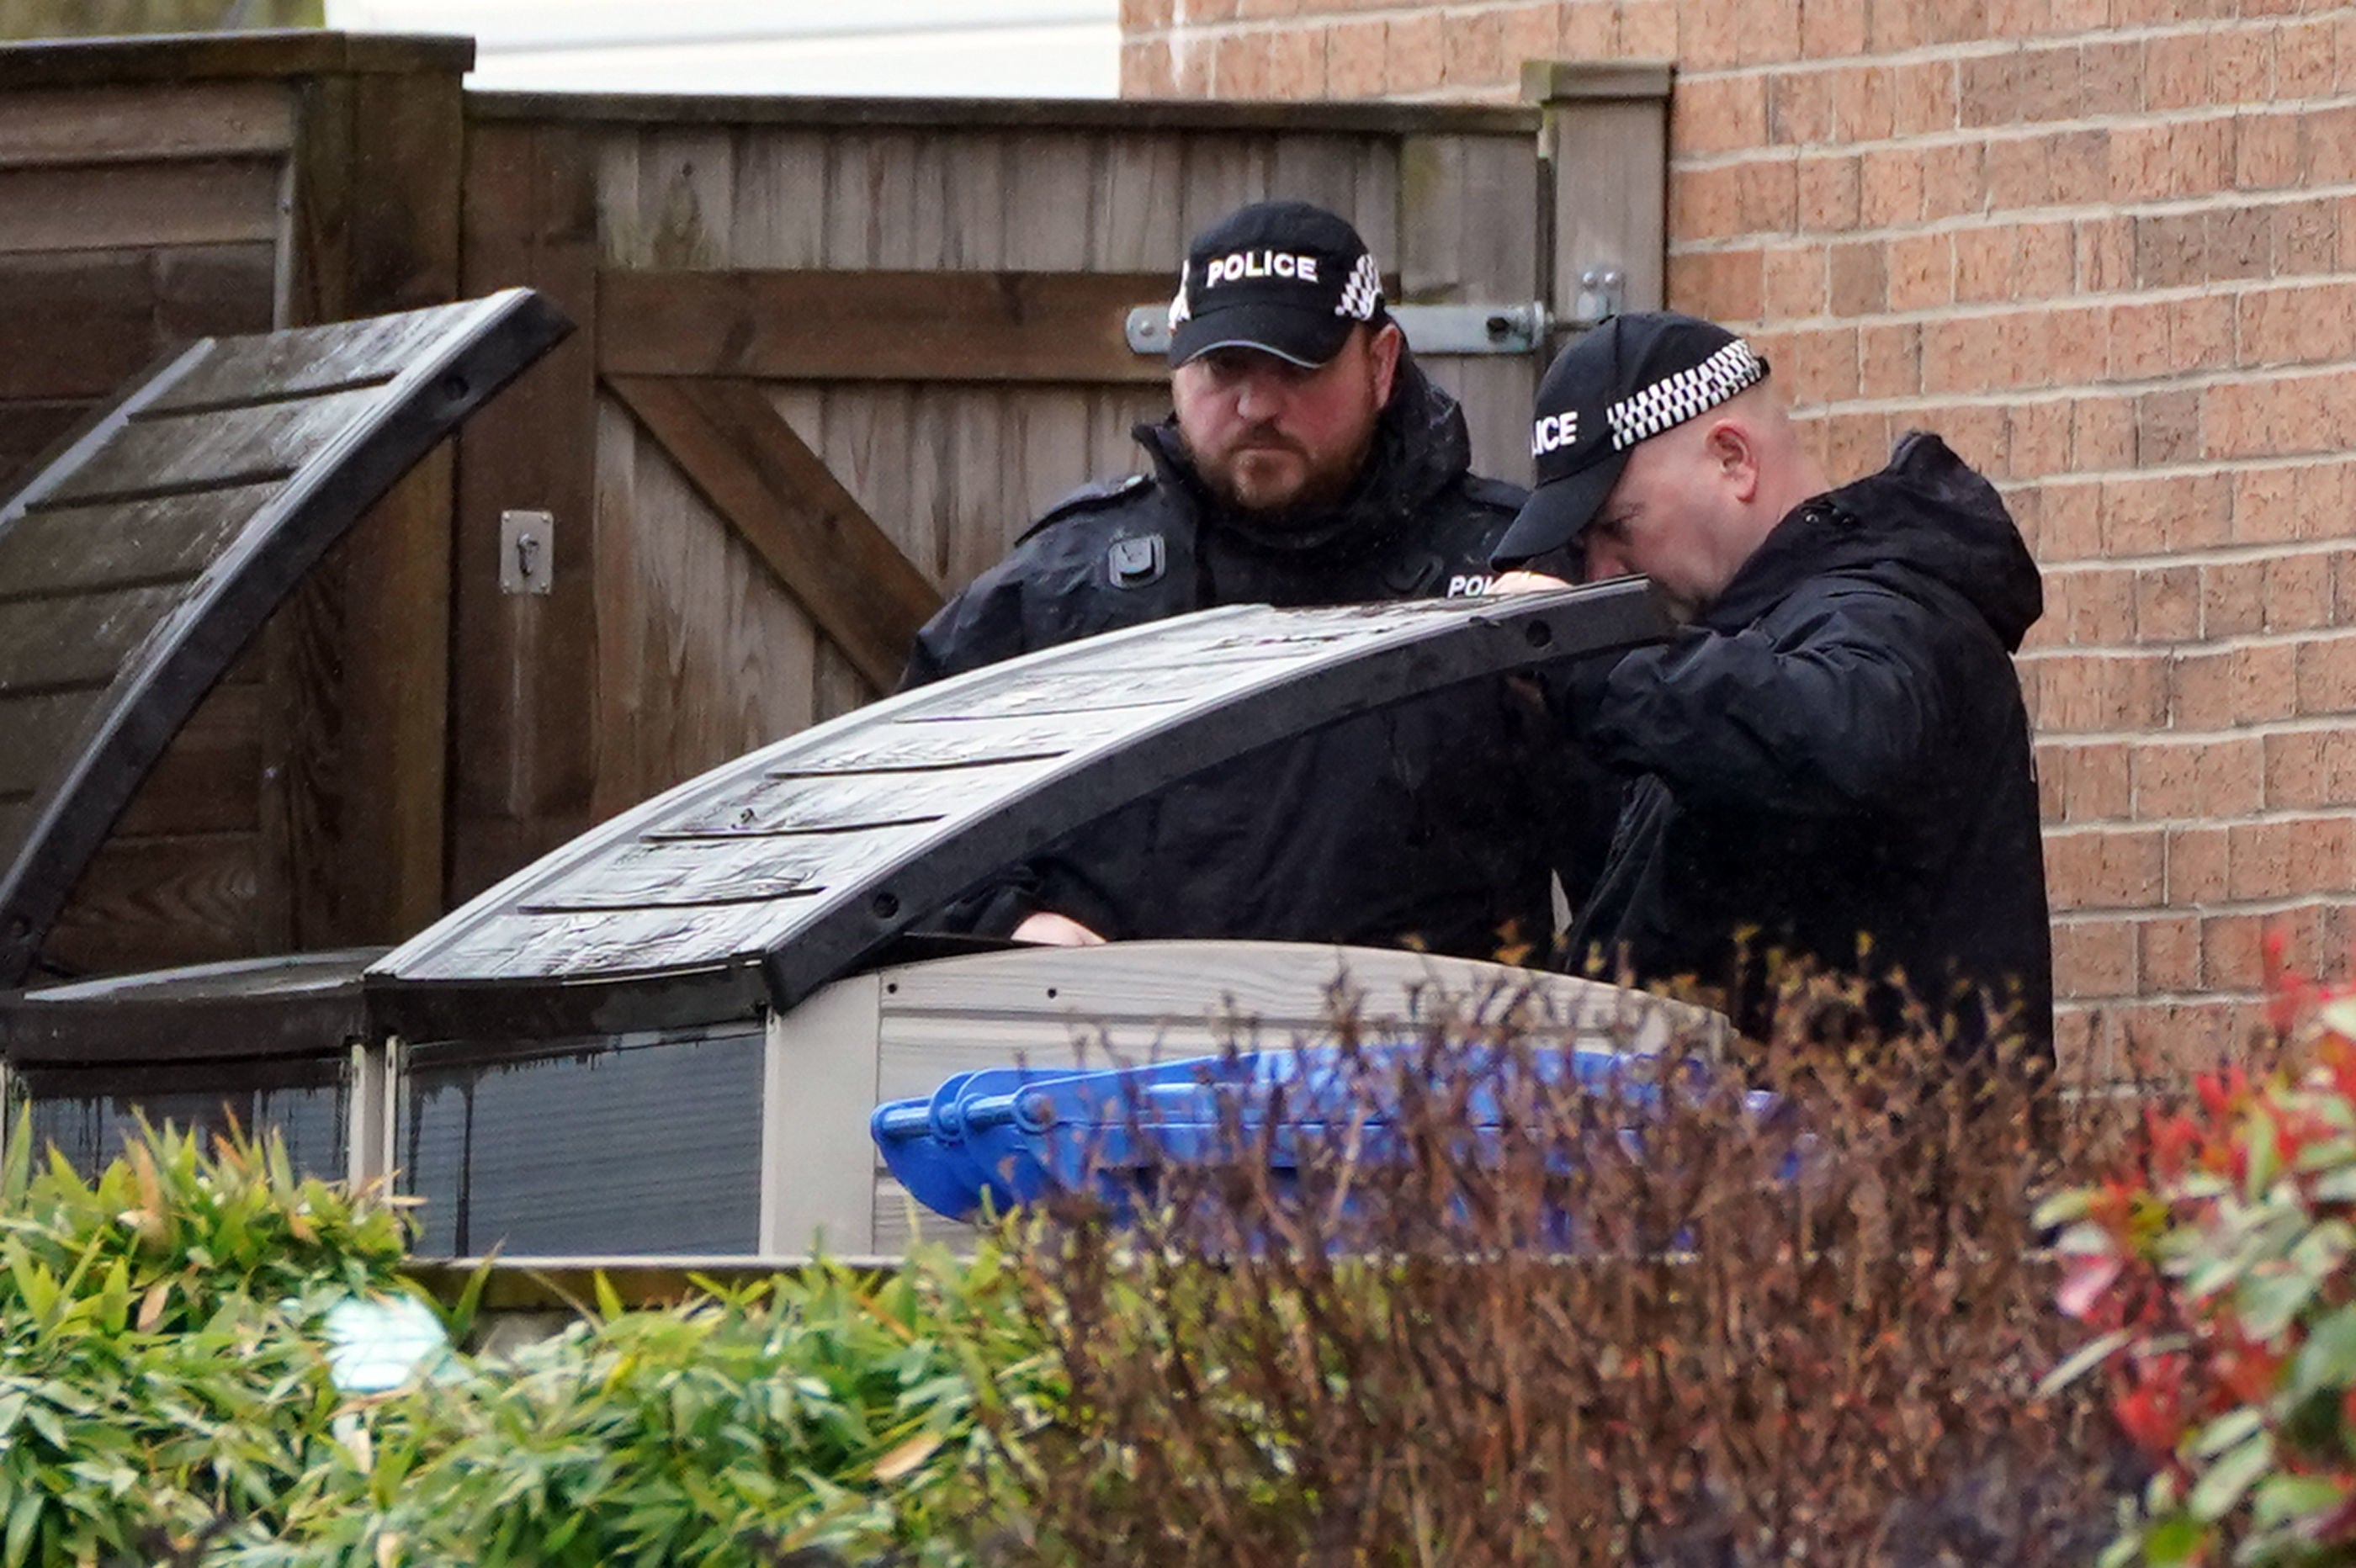 Officers from Police Scotland were seen looking through bins outside the home